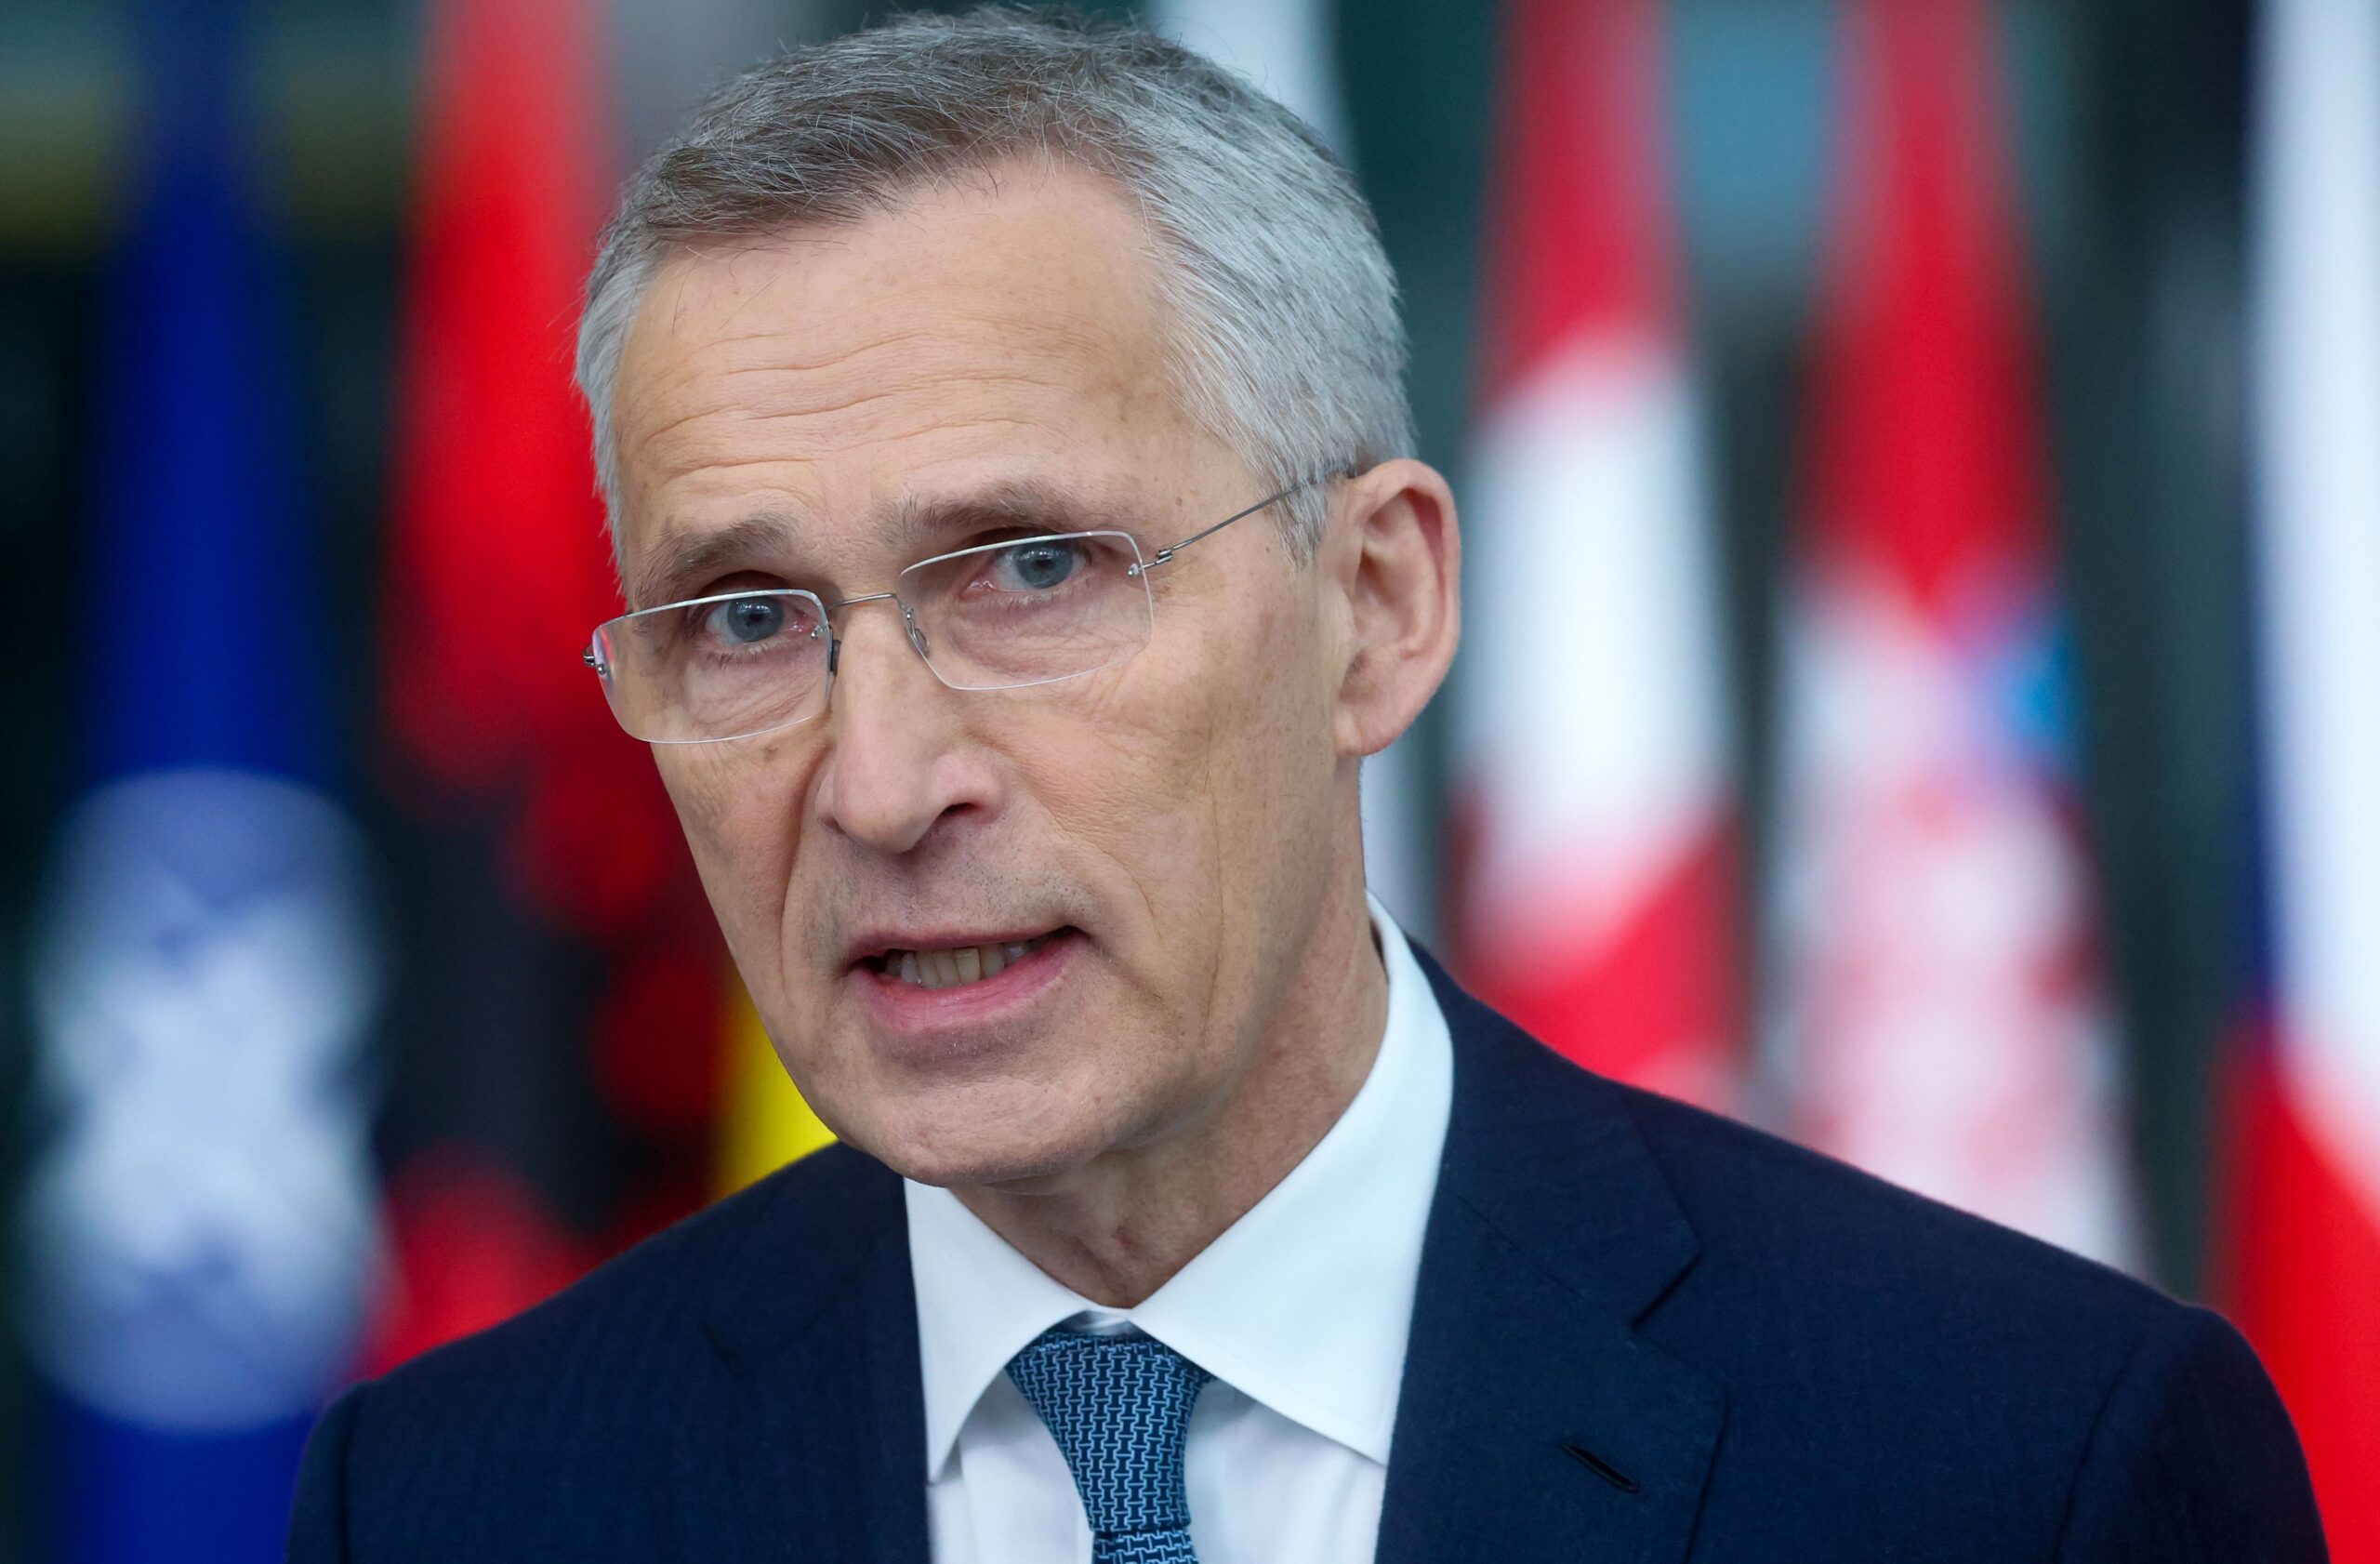 epa11256608 NATO Secretary General Jens Stoltenberg speaks to the media during a North Atlantic Treaty Organization (NATO) Foreign Affairs Ministers meeting in Brussels, Belgium, 03 April 2024. Allied Foreign Affairs Ministers attend a meeting of NATO Ministers of Foreign Affairs at NATO Headquarters in Brussels on 03-04 April as NATO celebrates its 75th anniversary. On 04 April 1949, the 12 founding countries signed the North Atlantic Treaty, called the Washington Treaty. It committed each member to share the risk, responsibilities, and benefits of collective defense.  EPA/OLIVIER HOSLET